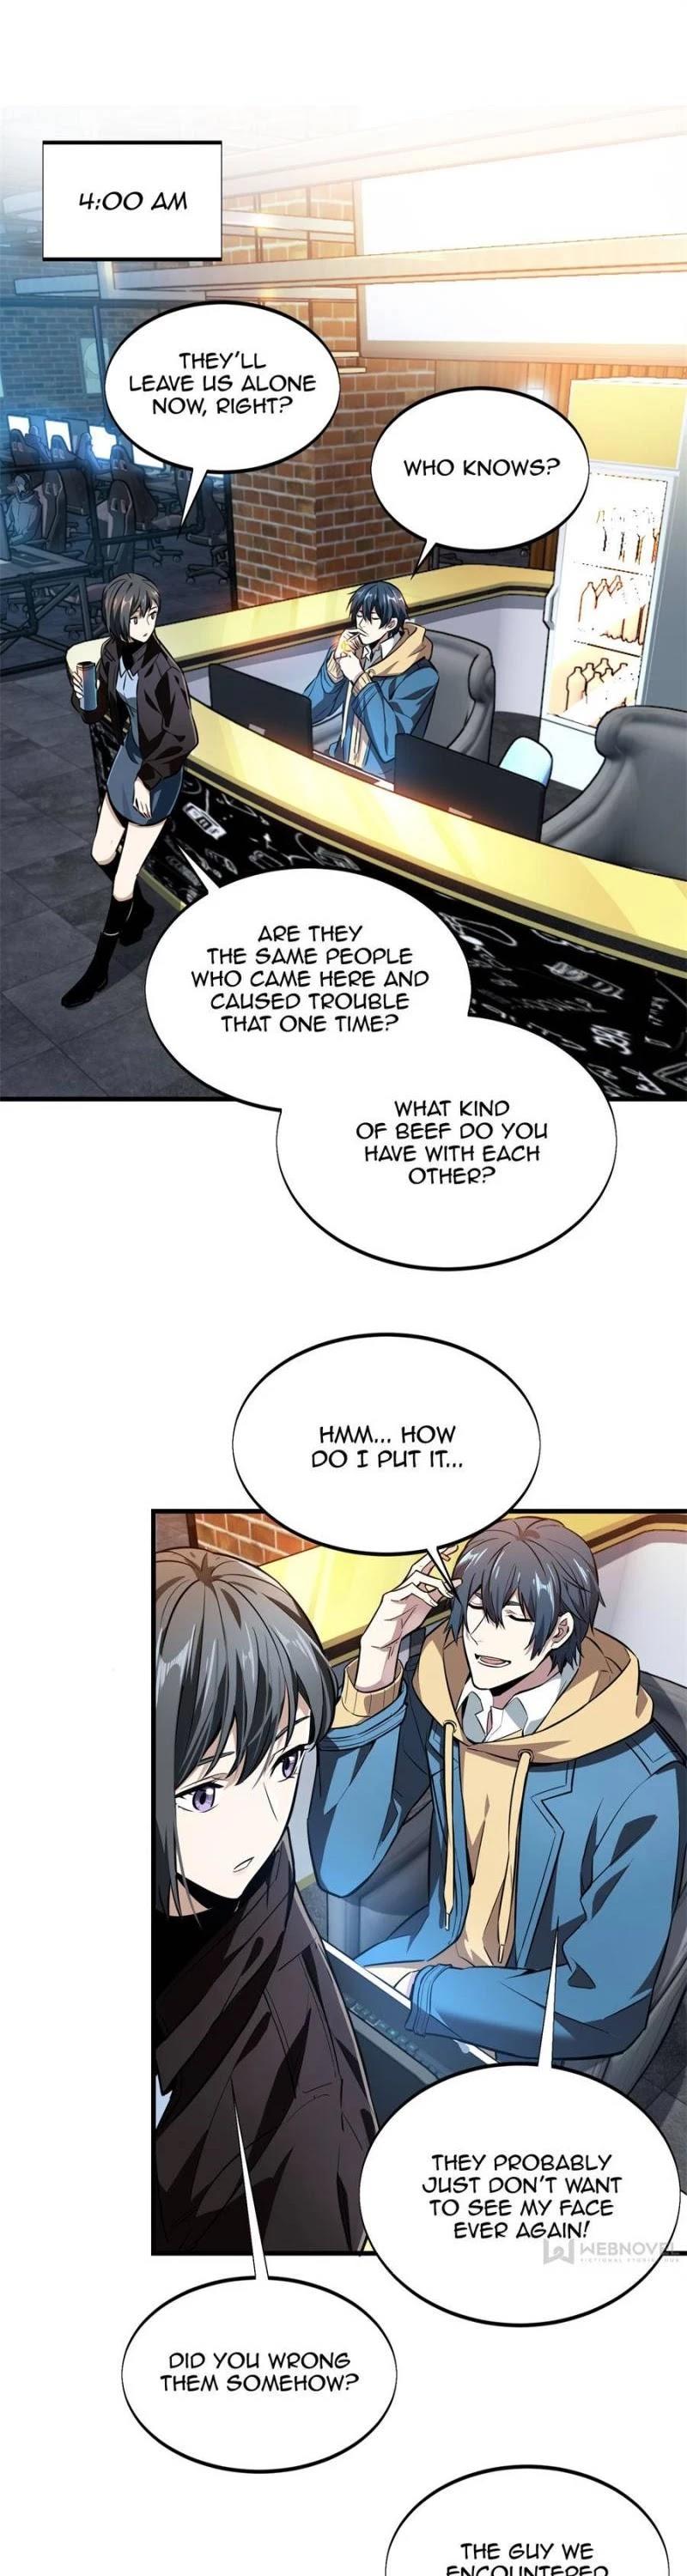 The King's Avatar - Chapter 65 - Night Comic